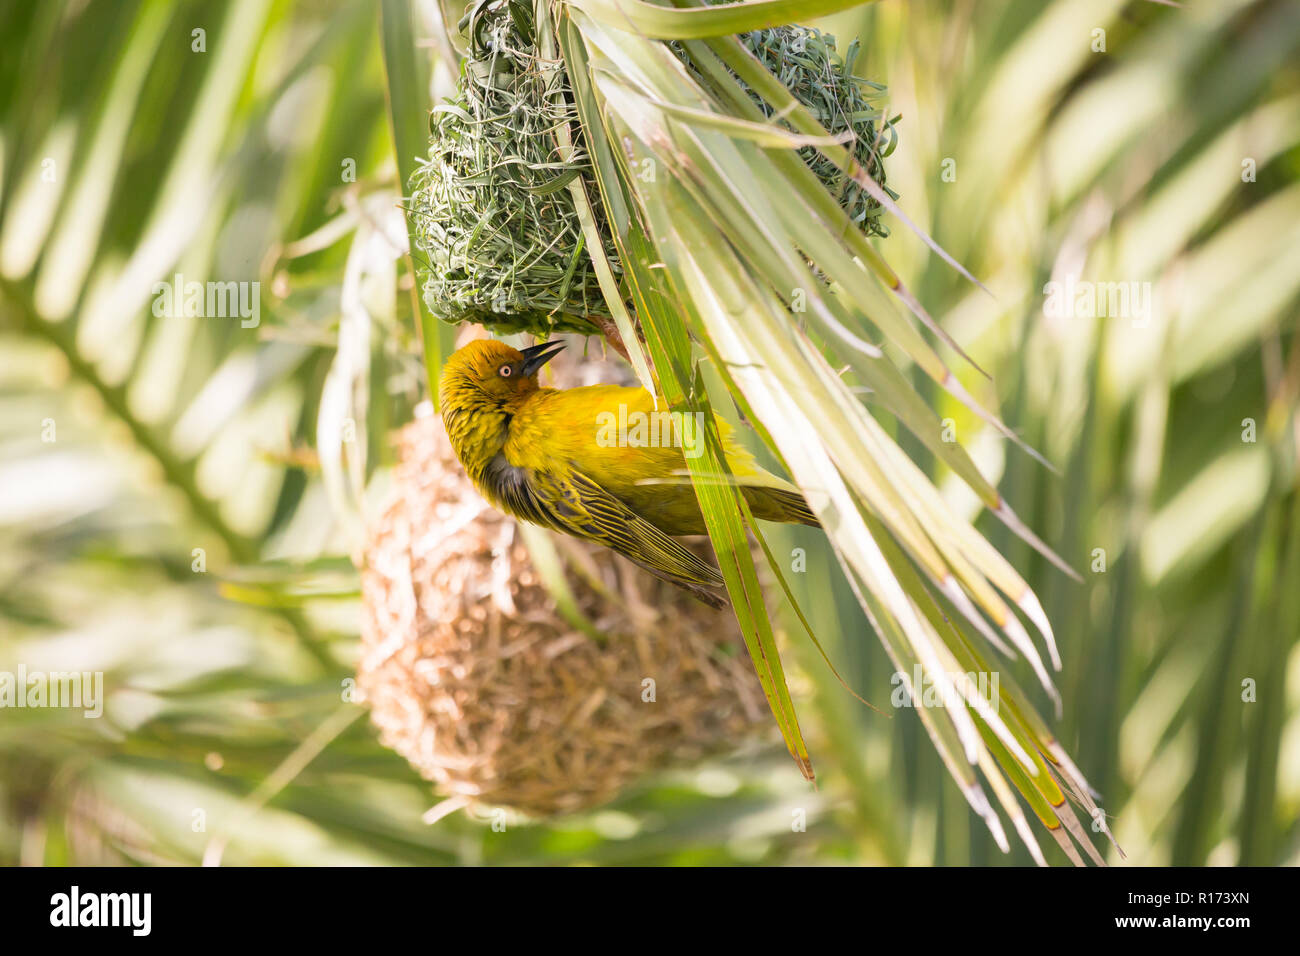 Cape Weaver (Ploceus capensis) bird hanging under its woven nest in a palm tree Stock Photo